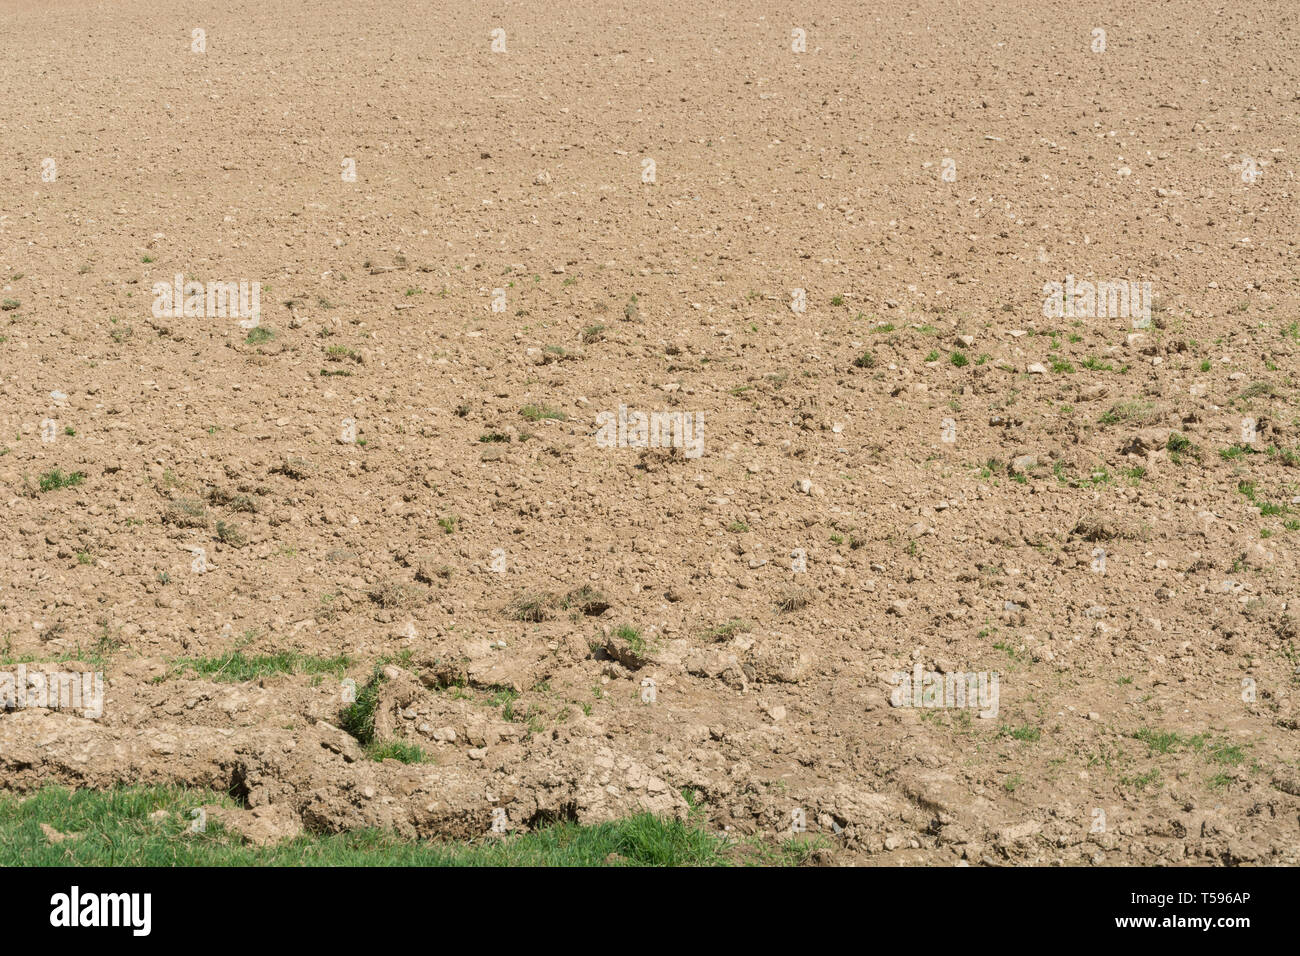 Field in Cornwall, UK, with parched tilled soil after period of little rain. Metaphor for water shortages, dry weather. Tilled soil texture. Stock Photo